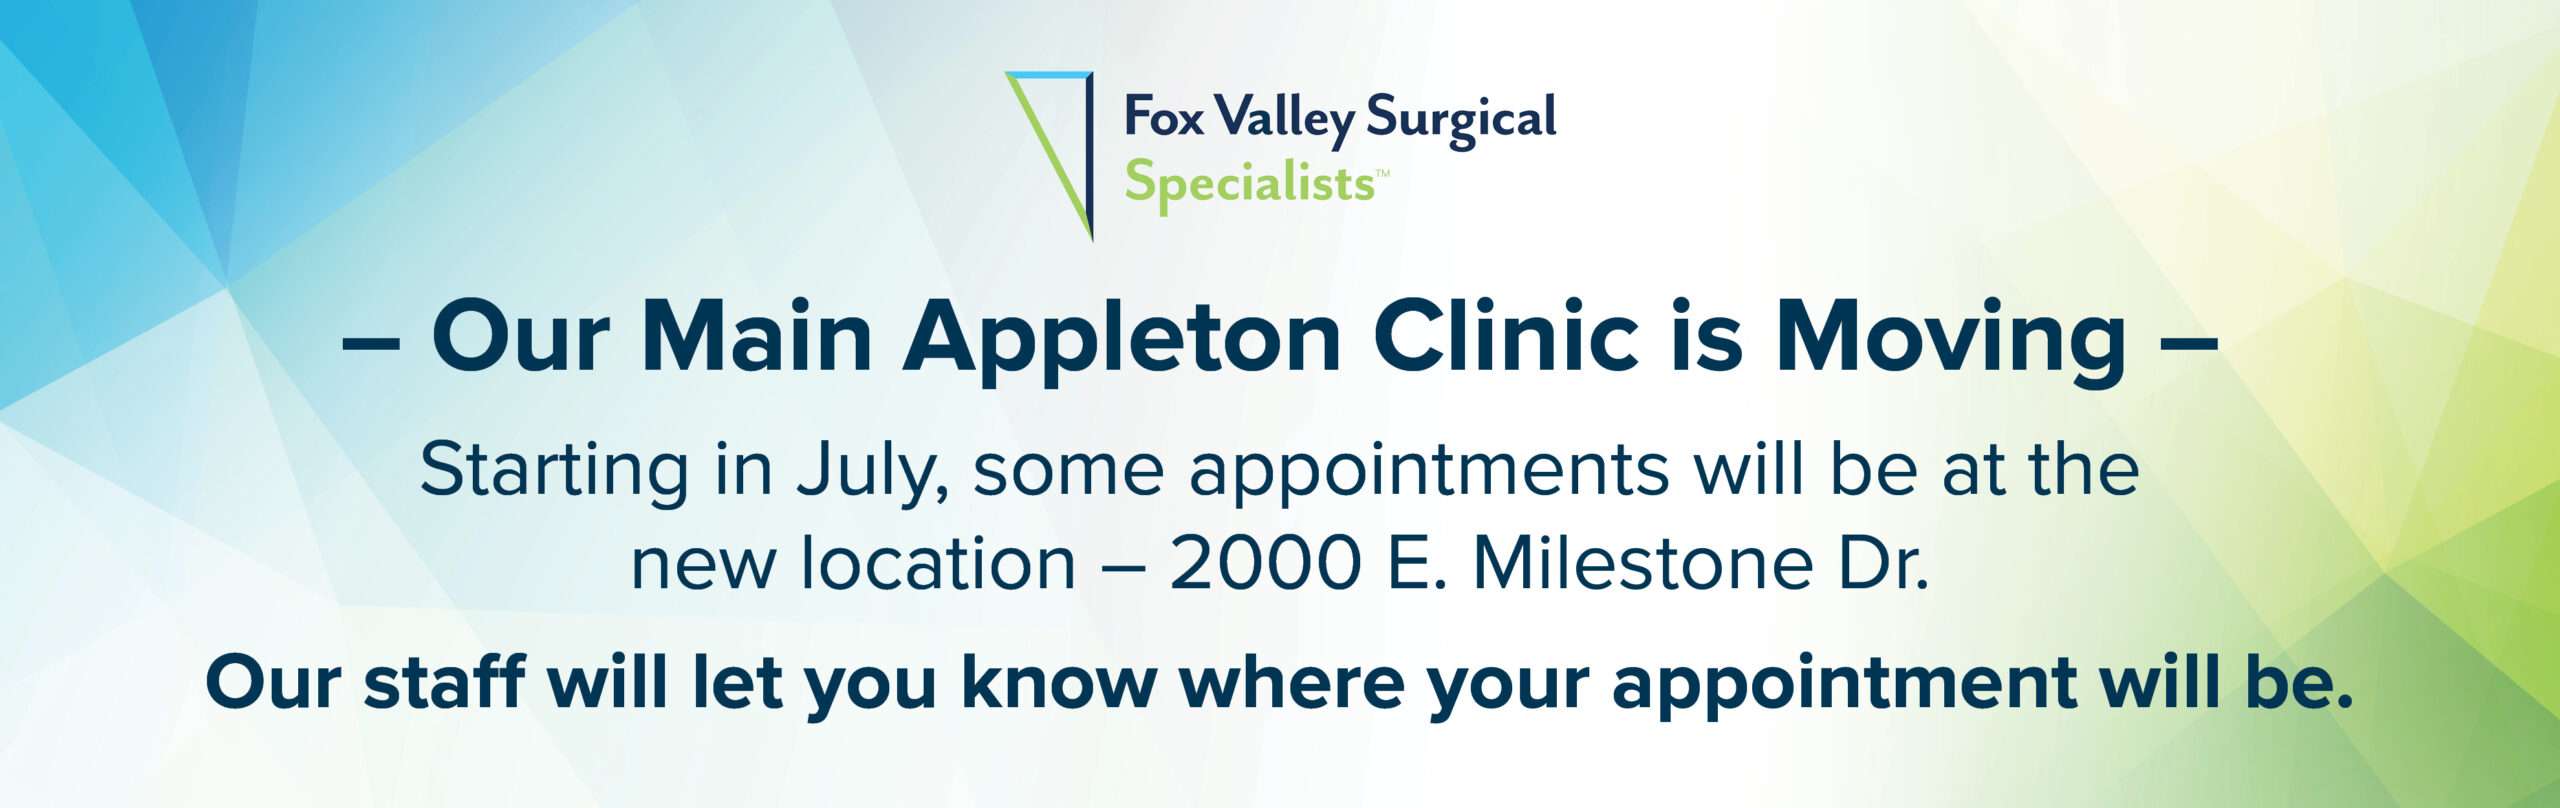 FVSS Main Appleton Clinic is Moving this Summer